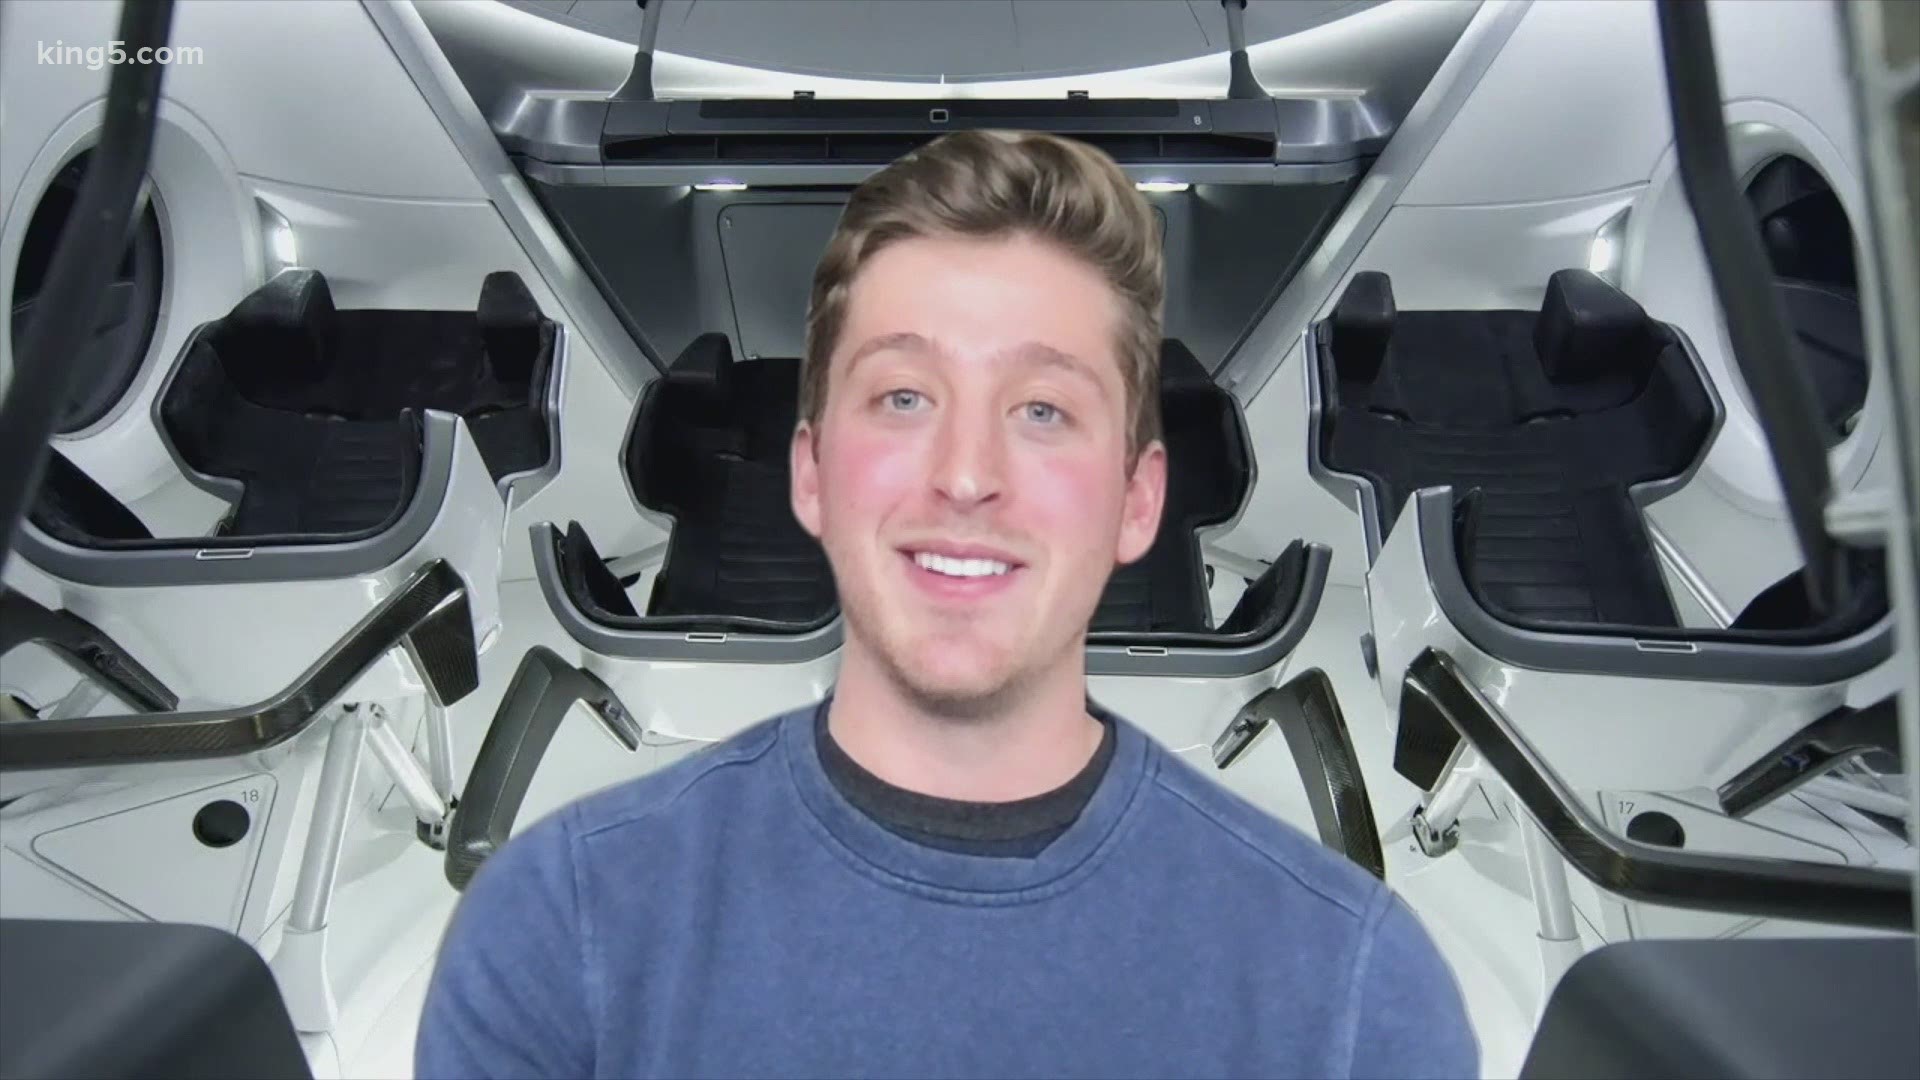 Austin Hirsh, 23, who created a freeze-dried smoothie startup, hopes to get a seat on SpaceX's first all-civilian space mission, Inspiration4.